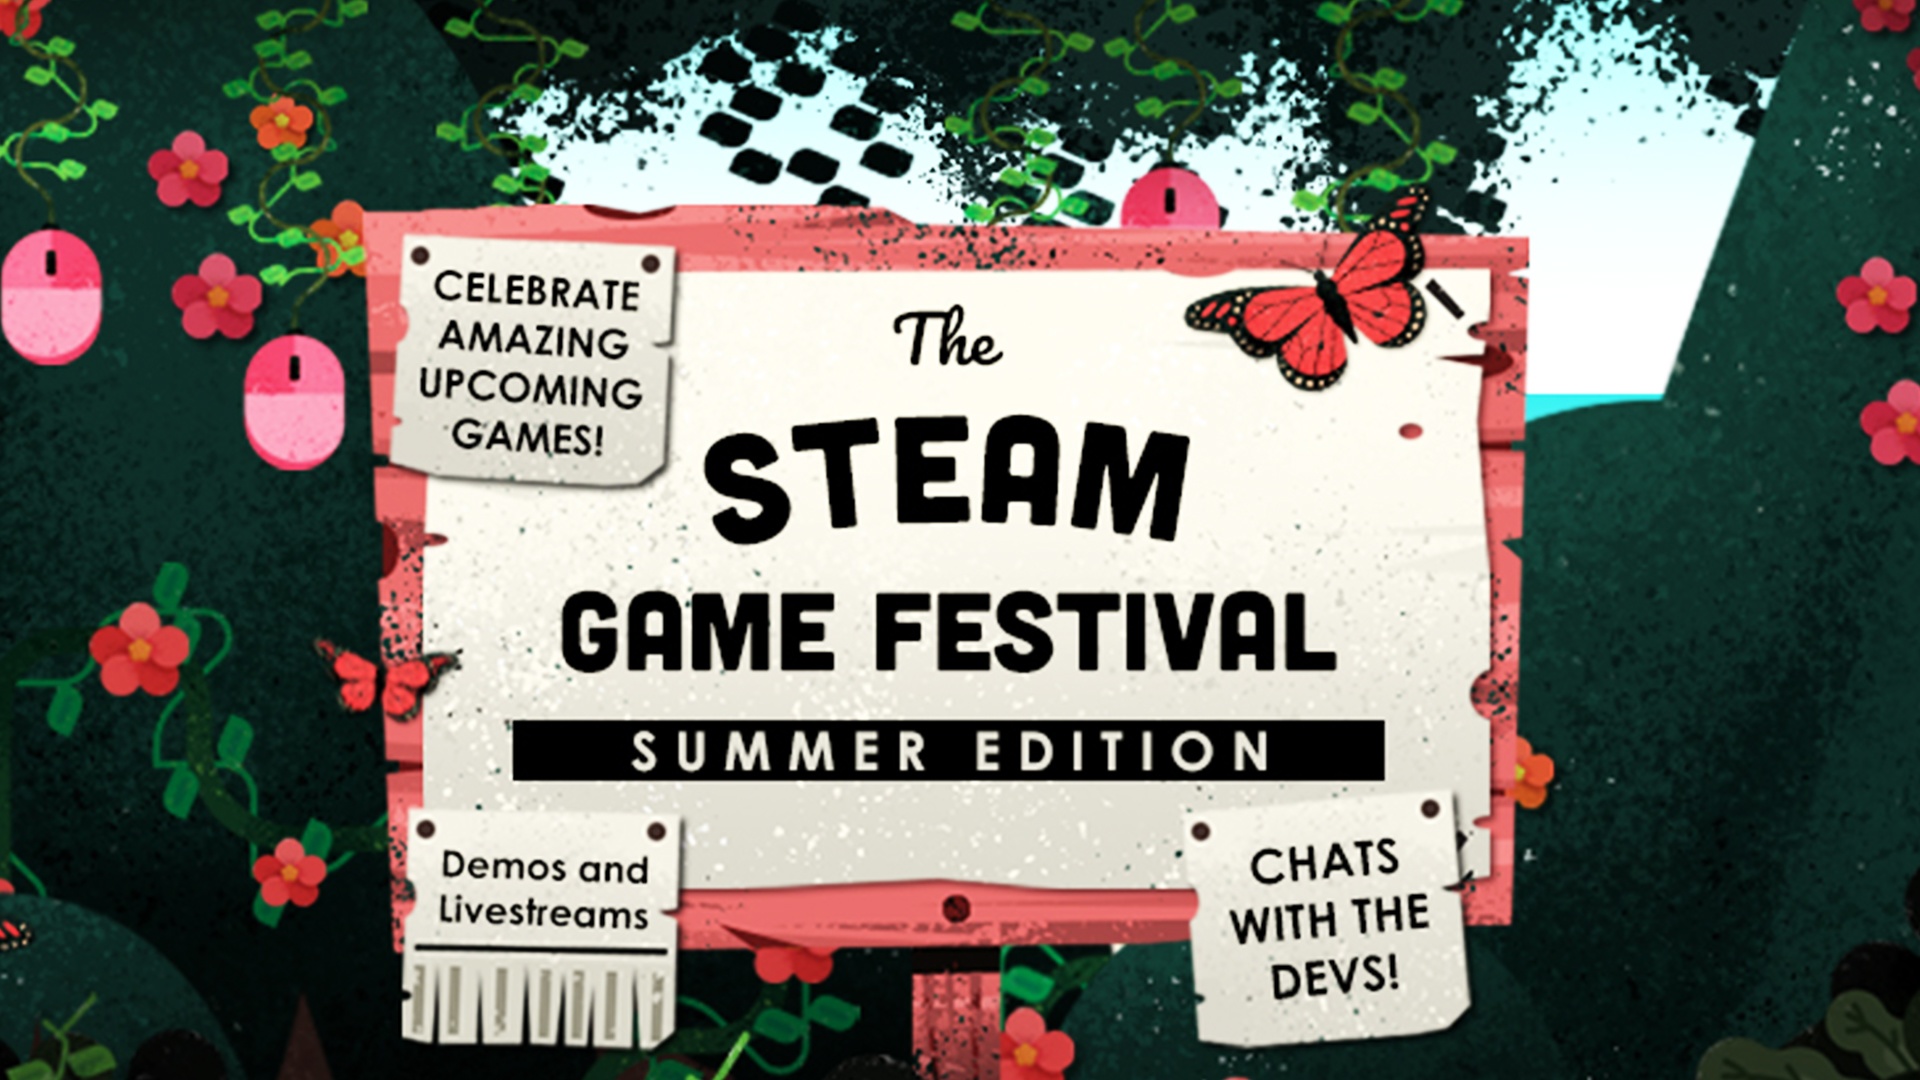 Steam Summer Festival: The Date for the next Demo Event has been set